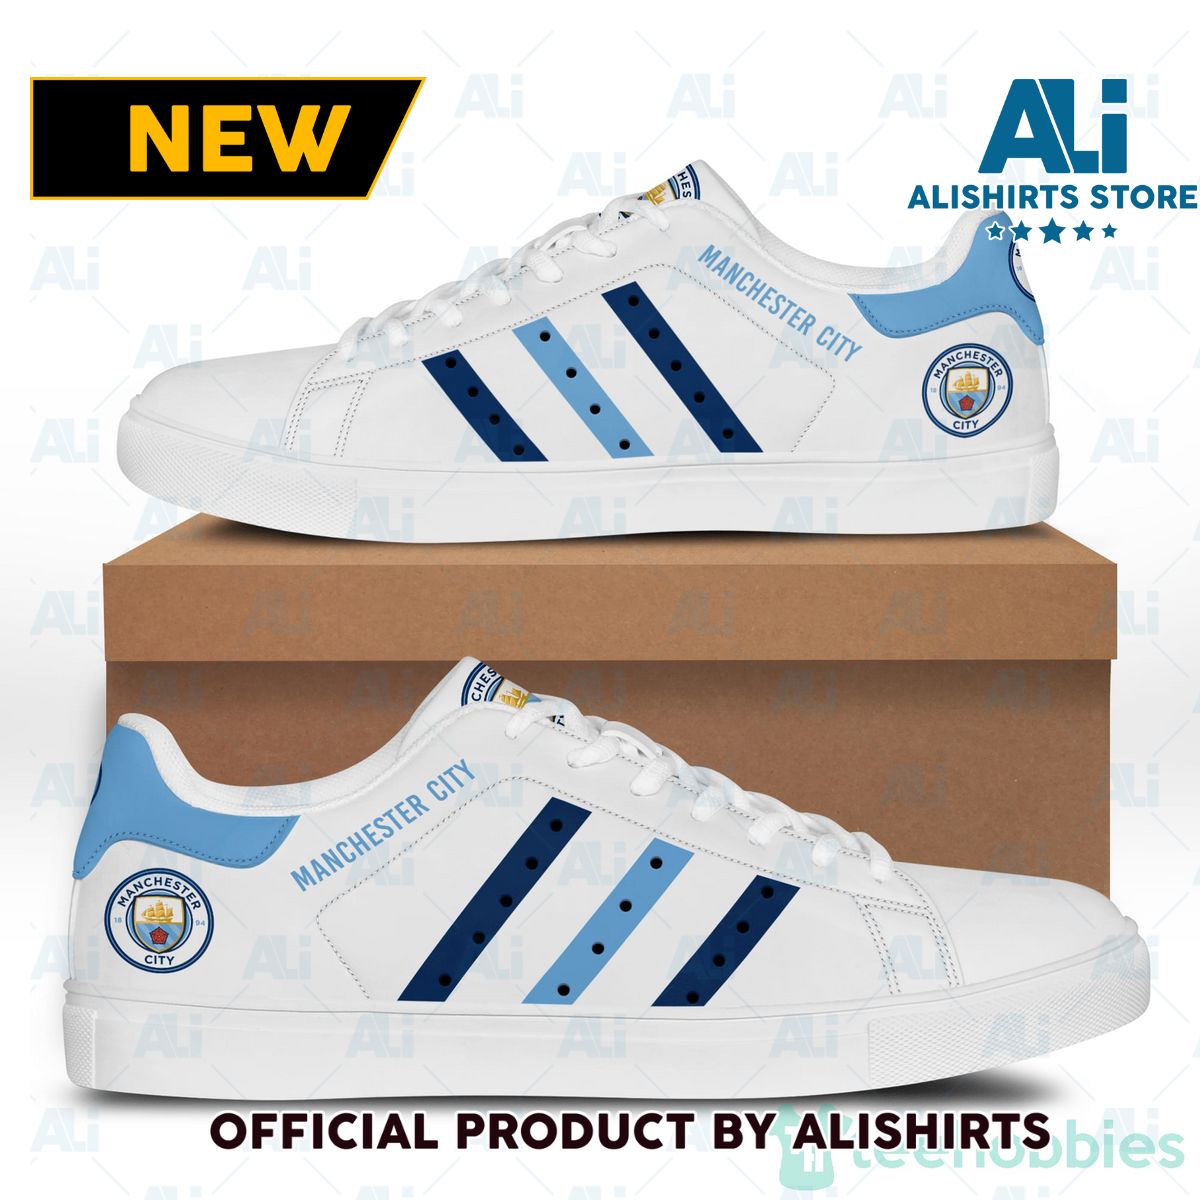 Manchester City Adidas Stan Smith Low Top Skate Shoes - XK91